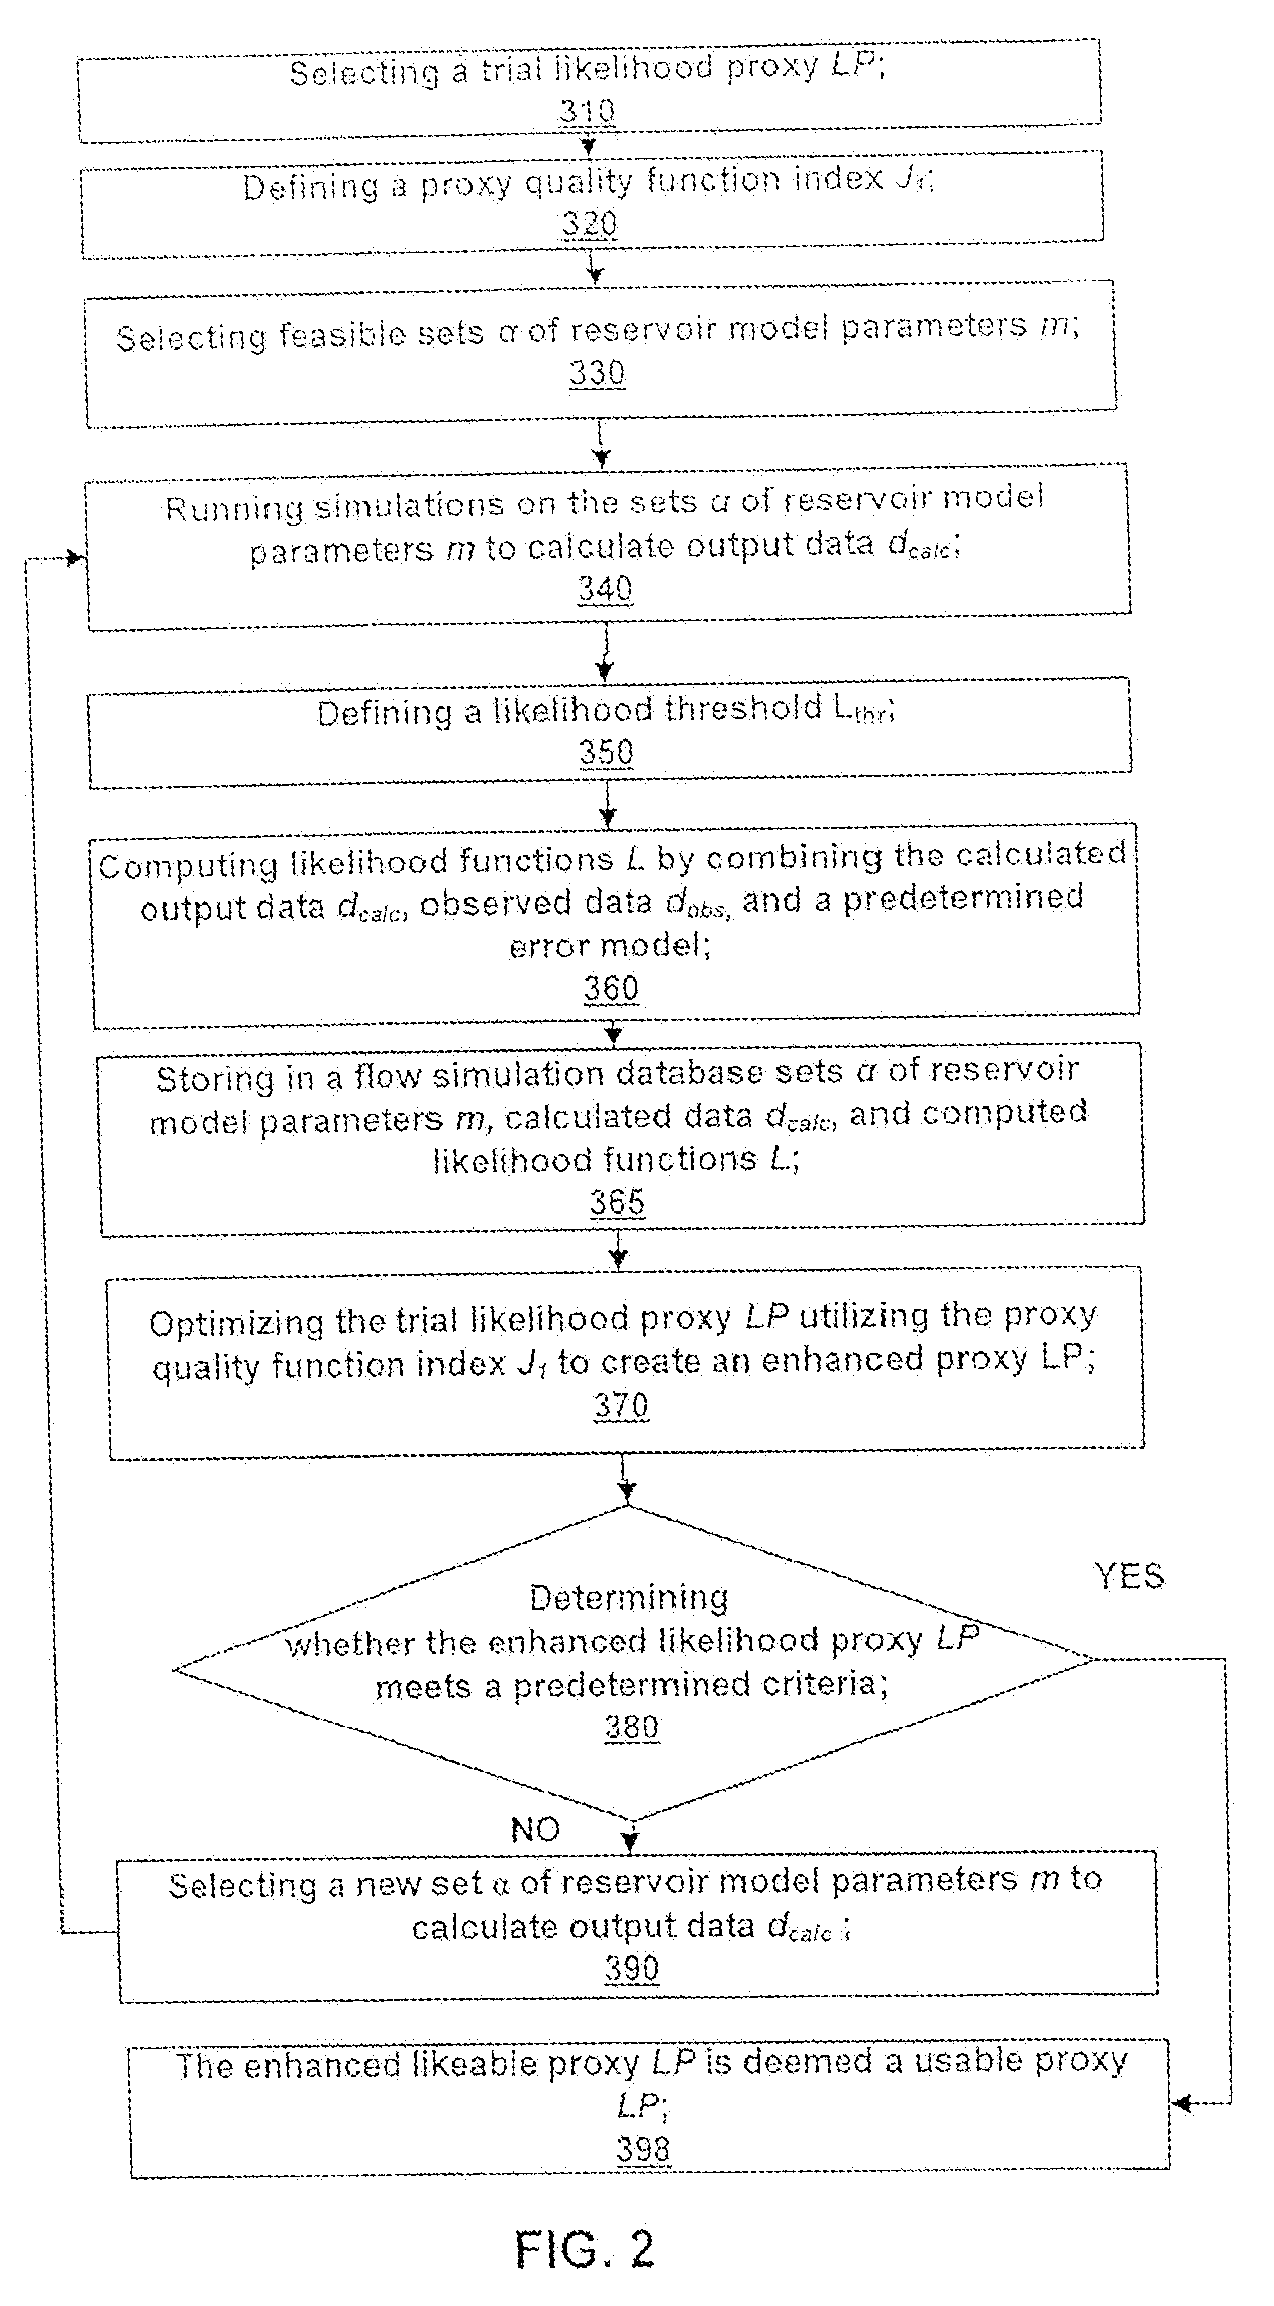 Method, system and program storage device for history matching and forecasting of hydrocarbon-bearing reservoirs utilizing proxies for likelihood functions